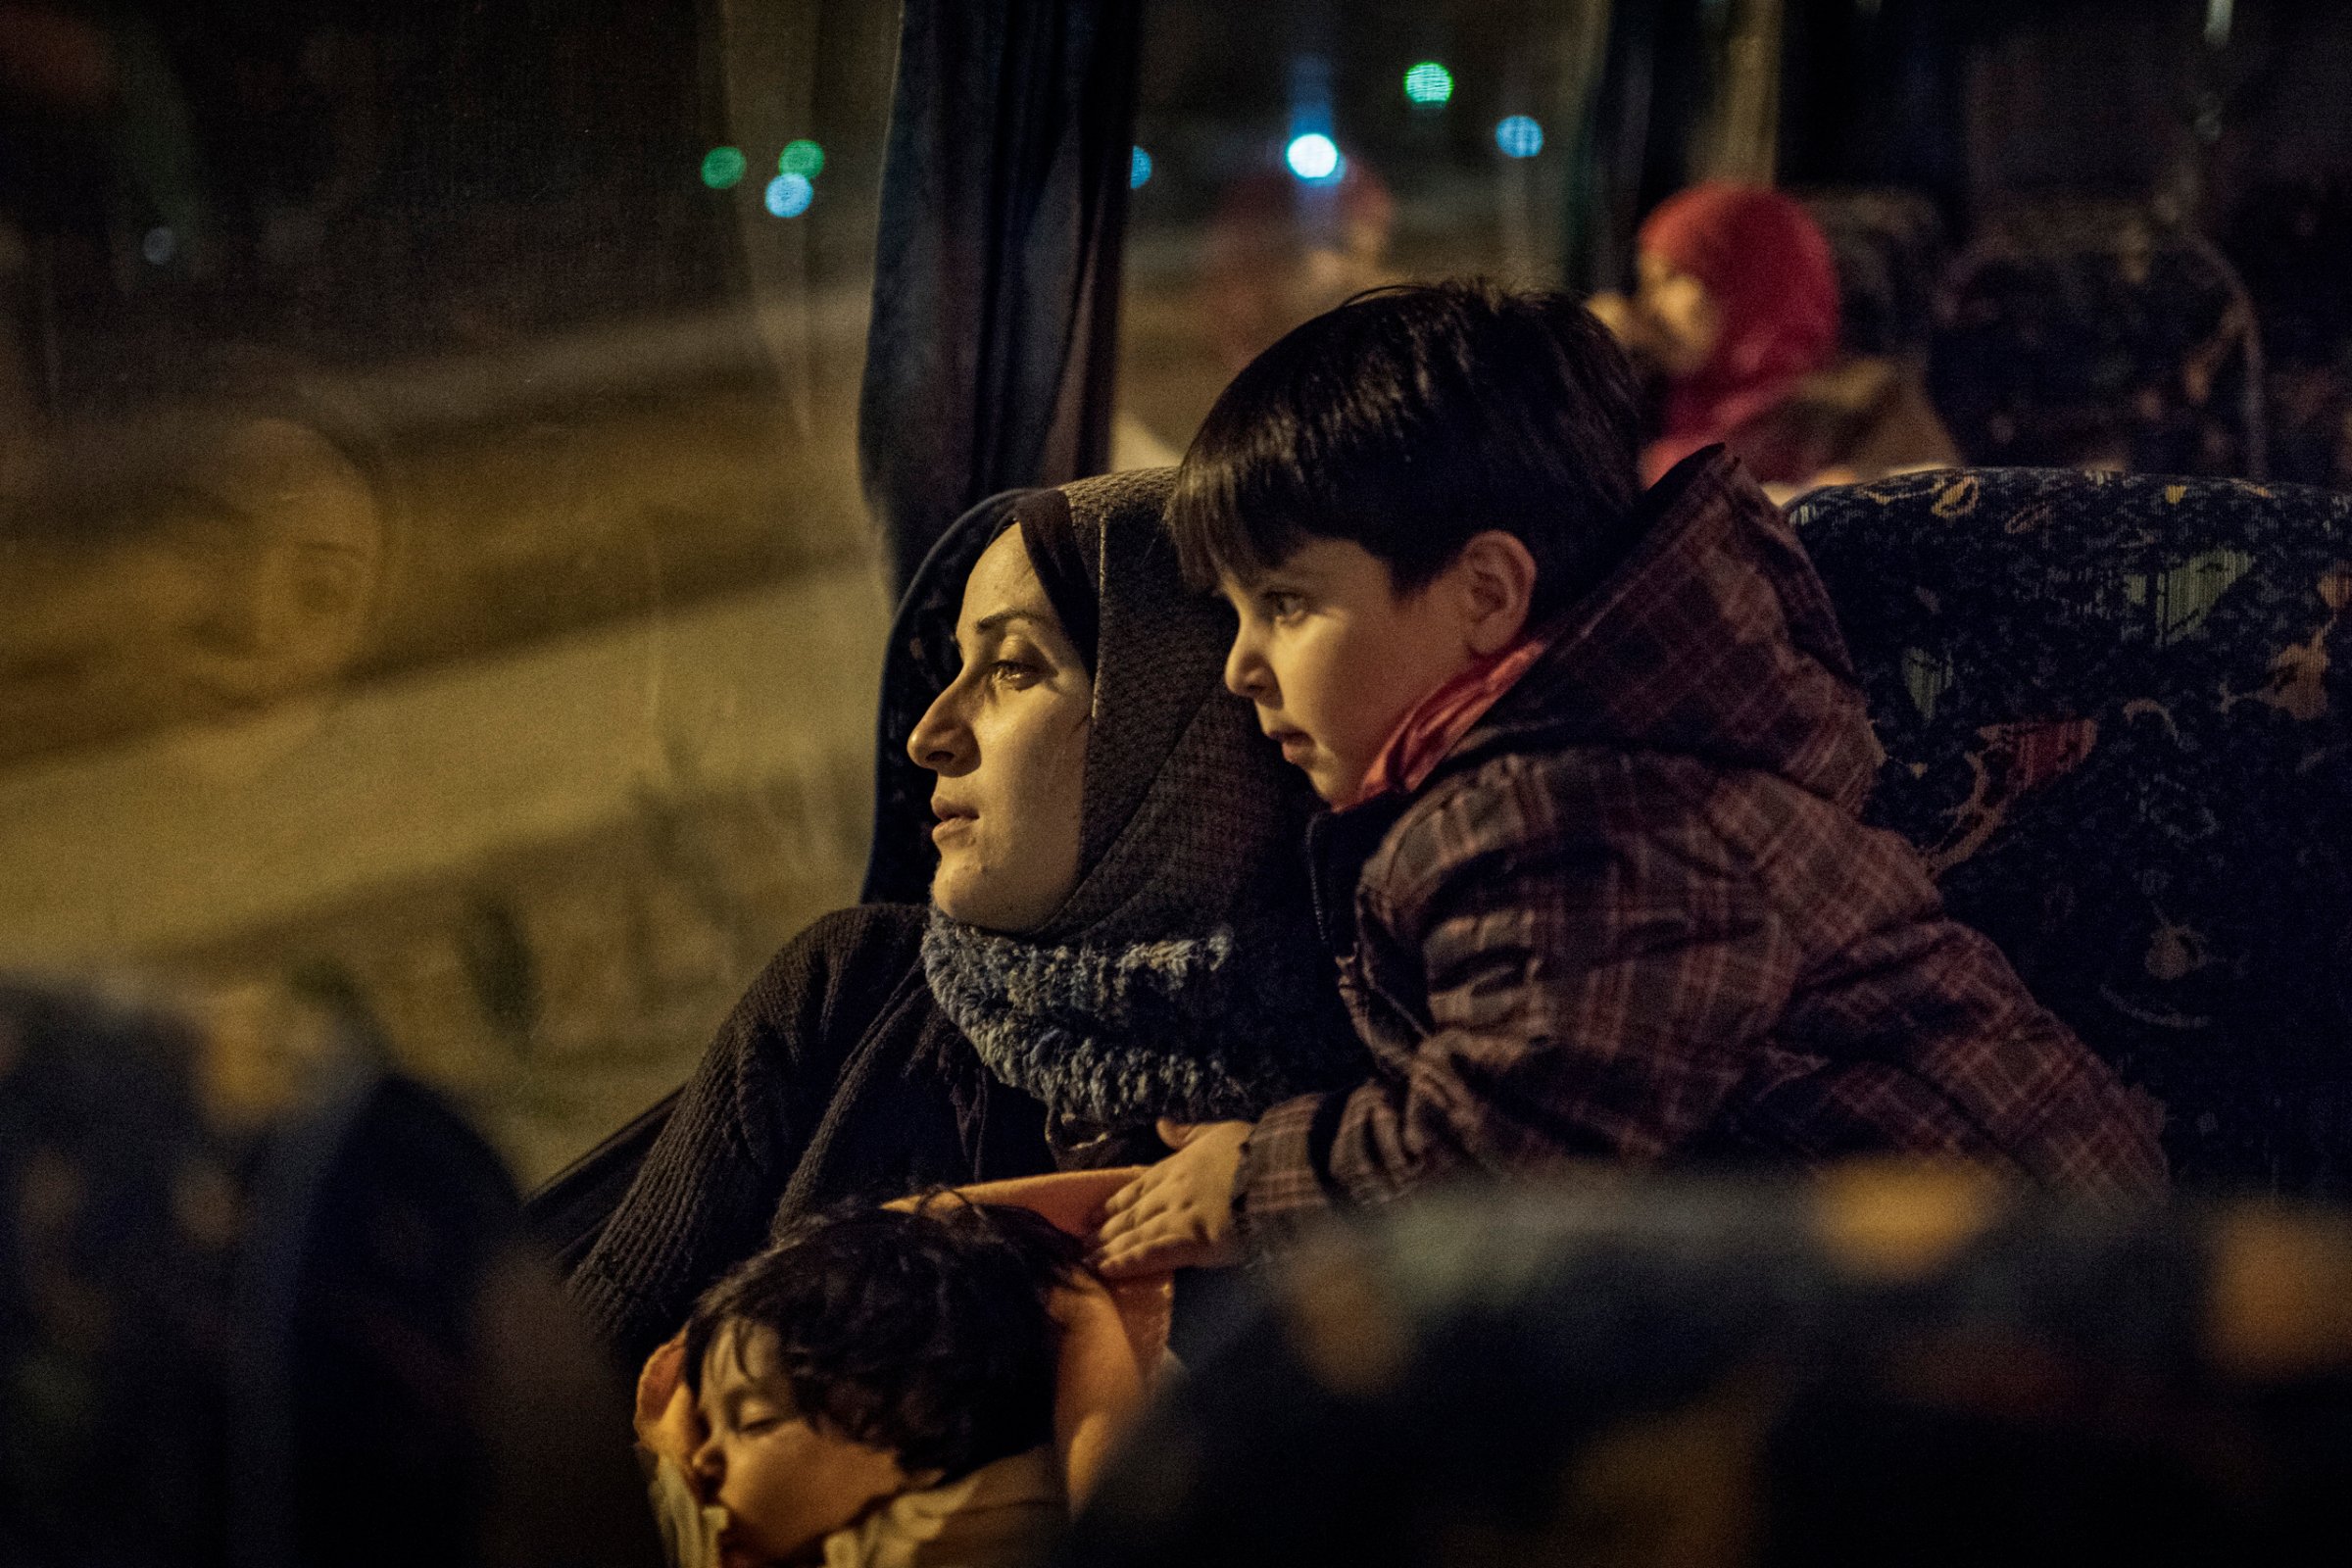 Taimaa Abazli, a Syrian refugee, with her baby Heln and son Wael, take an overnight bus to Athens, where they will learn which country will grant them asylum, Jan. 19, 2017.Taimaa Abazli, a Syrian refugee, with her baby Heln and son Wael, on a 10-hour bus ride from Thessaloniki to Athens where they await news about their placement in Europe.